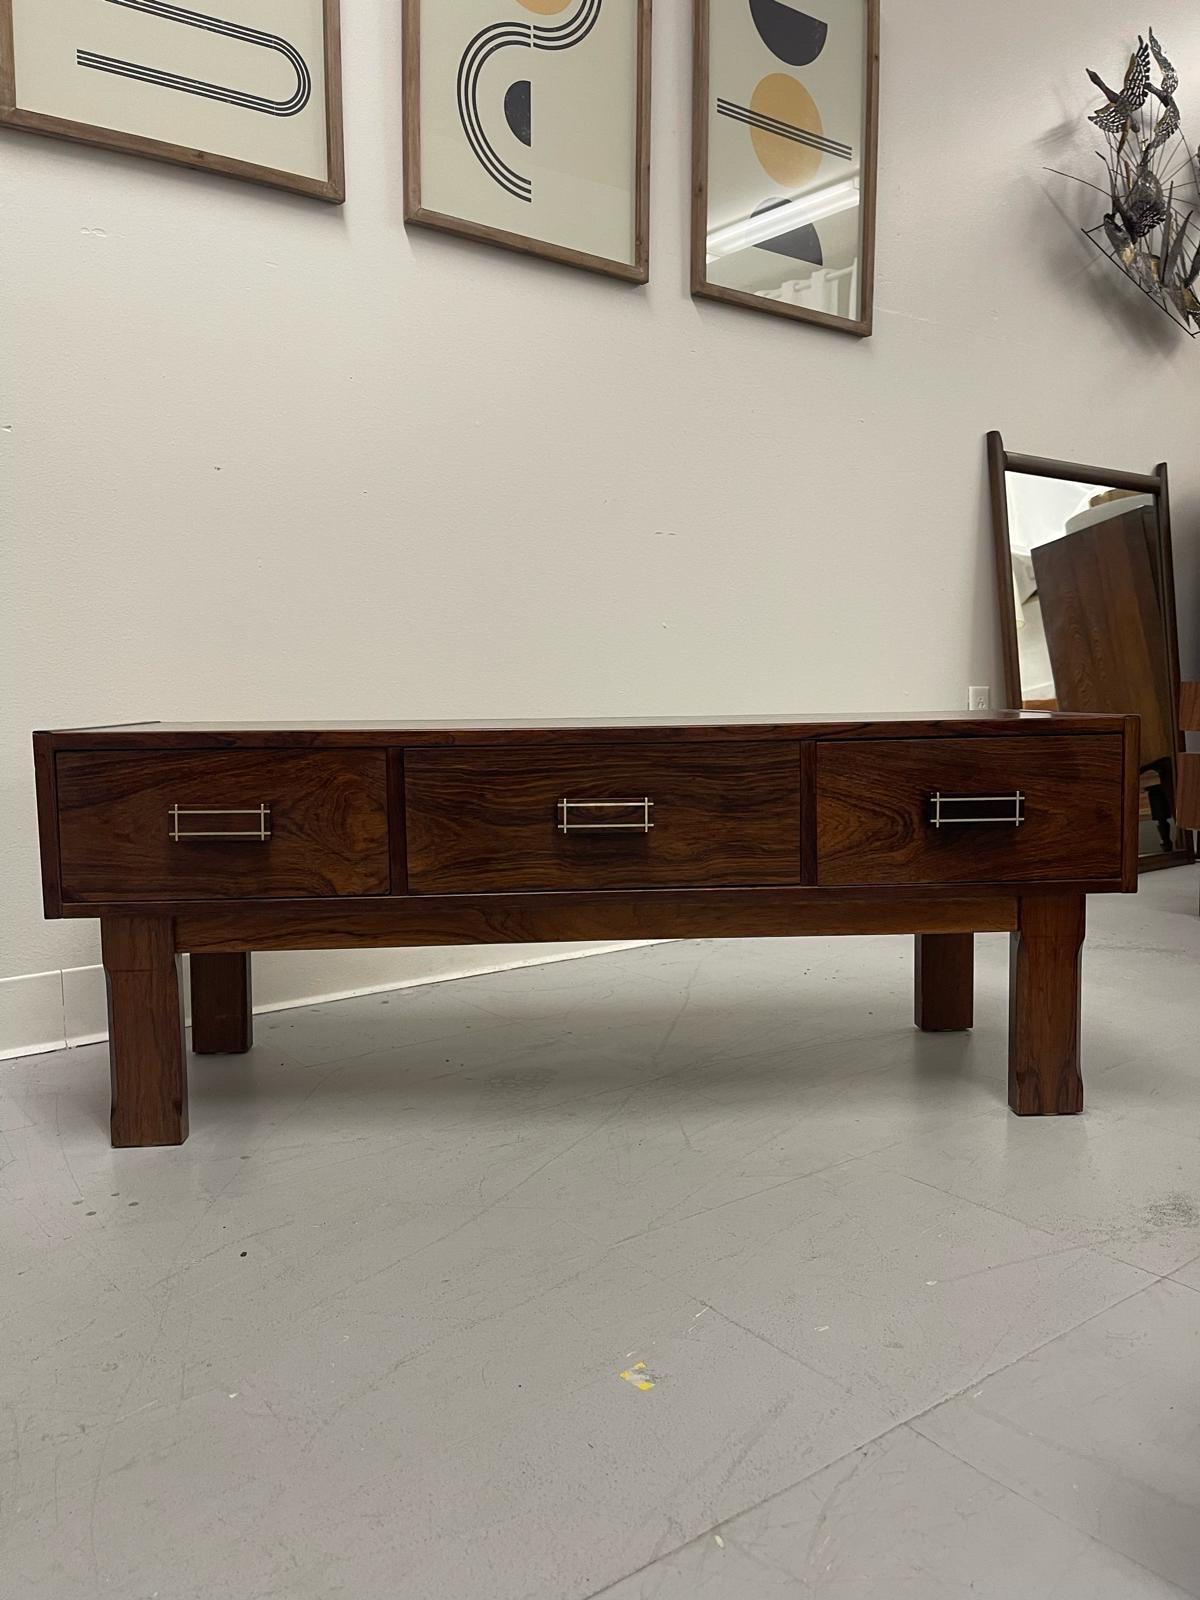 This Table Features wood Inlay Accents on Each of the Three Drawer Pulls. Beautiful Wood Grain throughput. Imported From Denmark. No Maker’s Mark. Vintage Condition Consistent with Age as Pictured.

Dimensions. 43 W ; 14 D ; 16 1/2 H